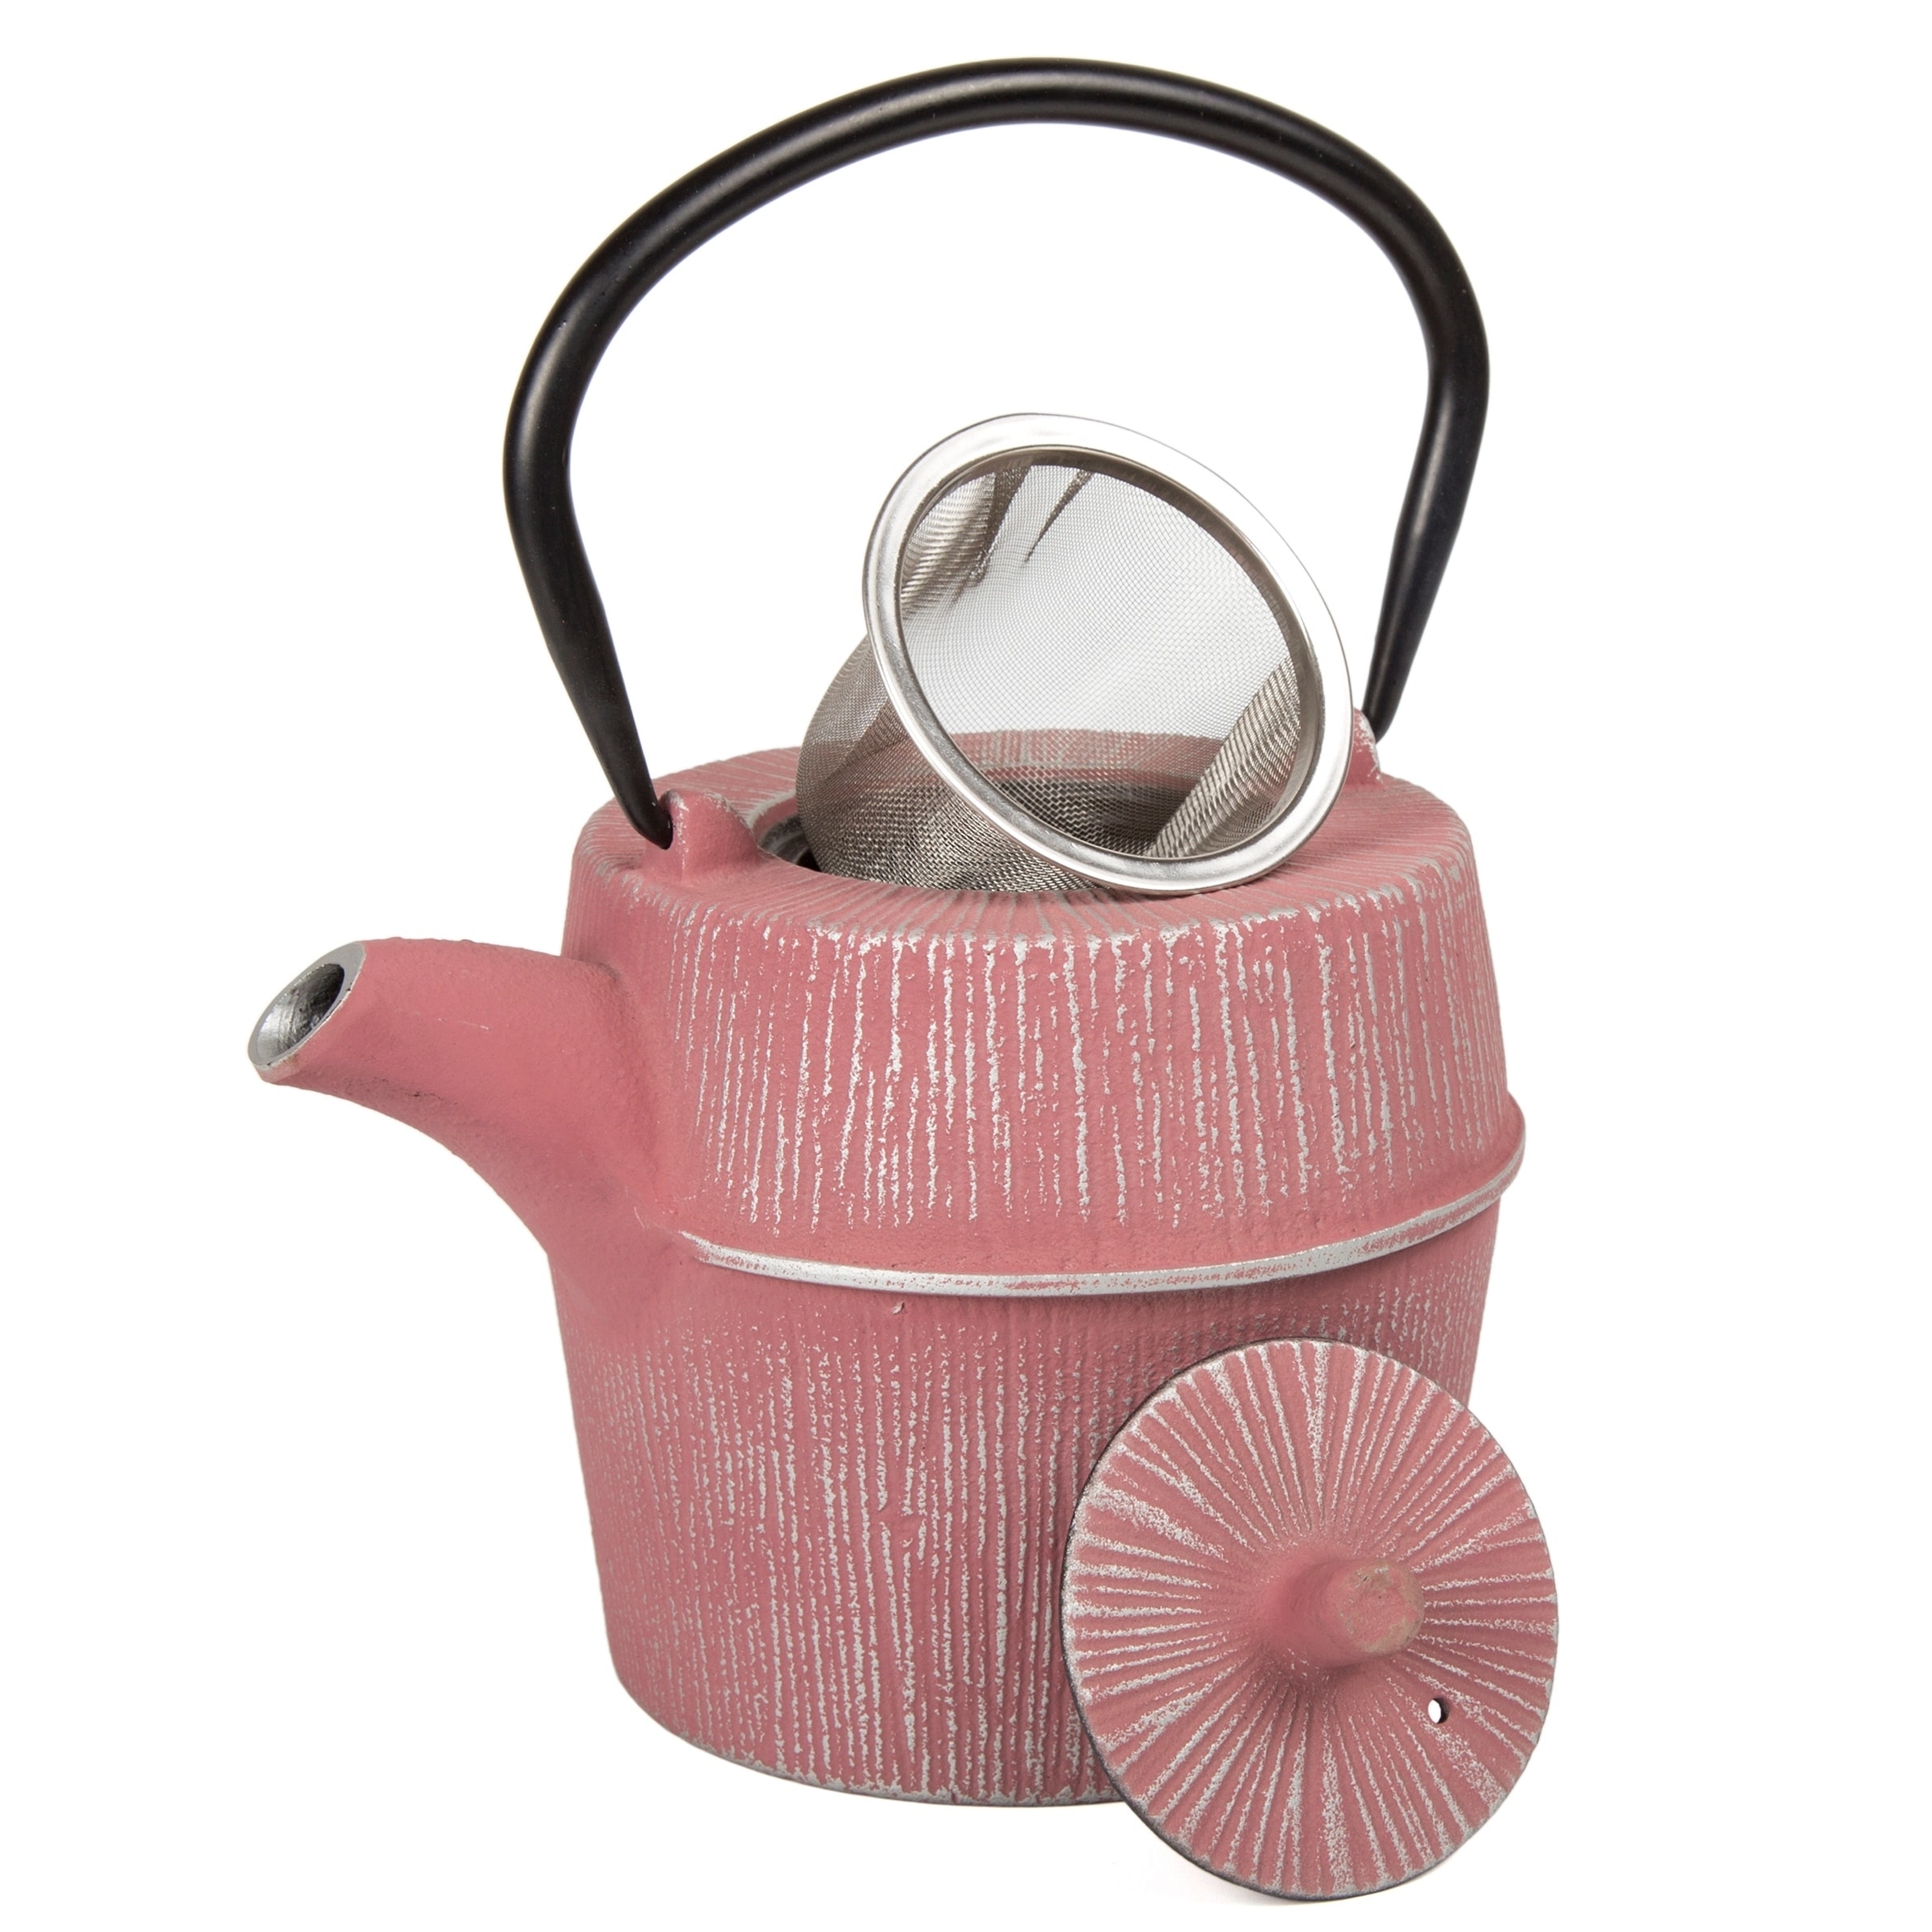 Creative Home 29 oz Cast Iron Tea Pot, Silver and Pink Color - Bed